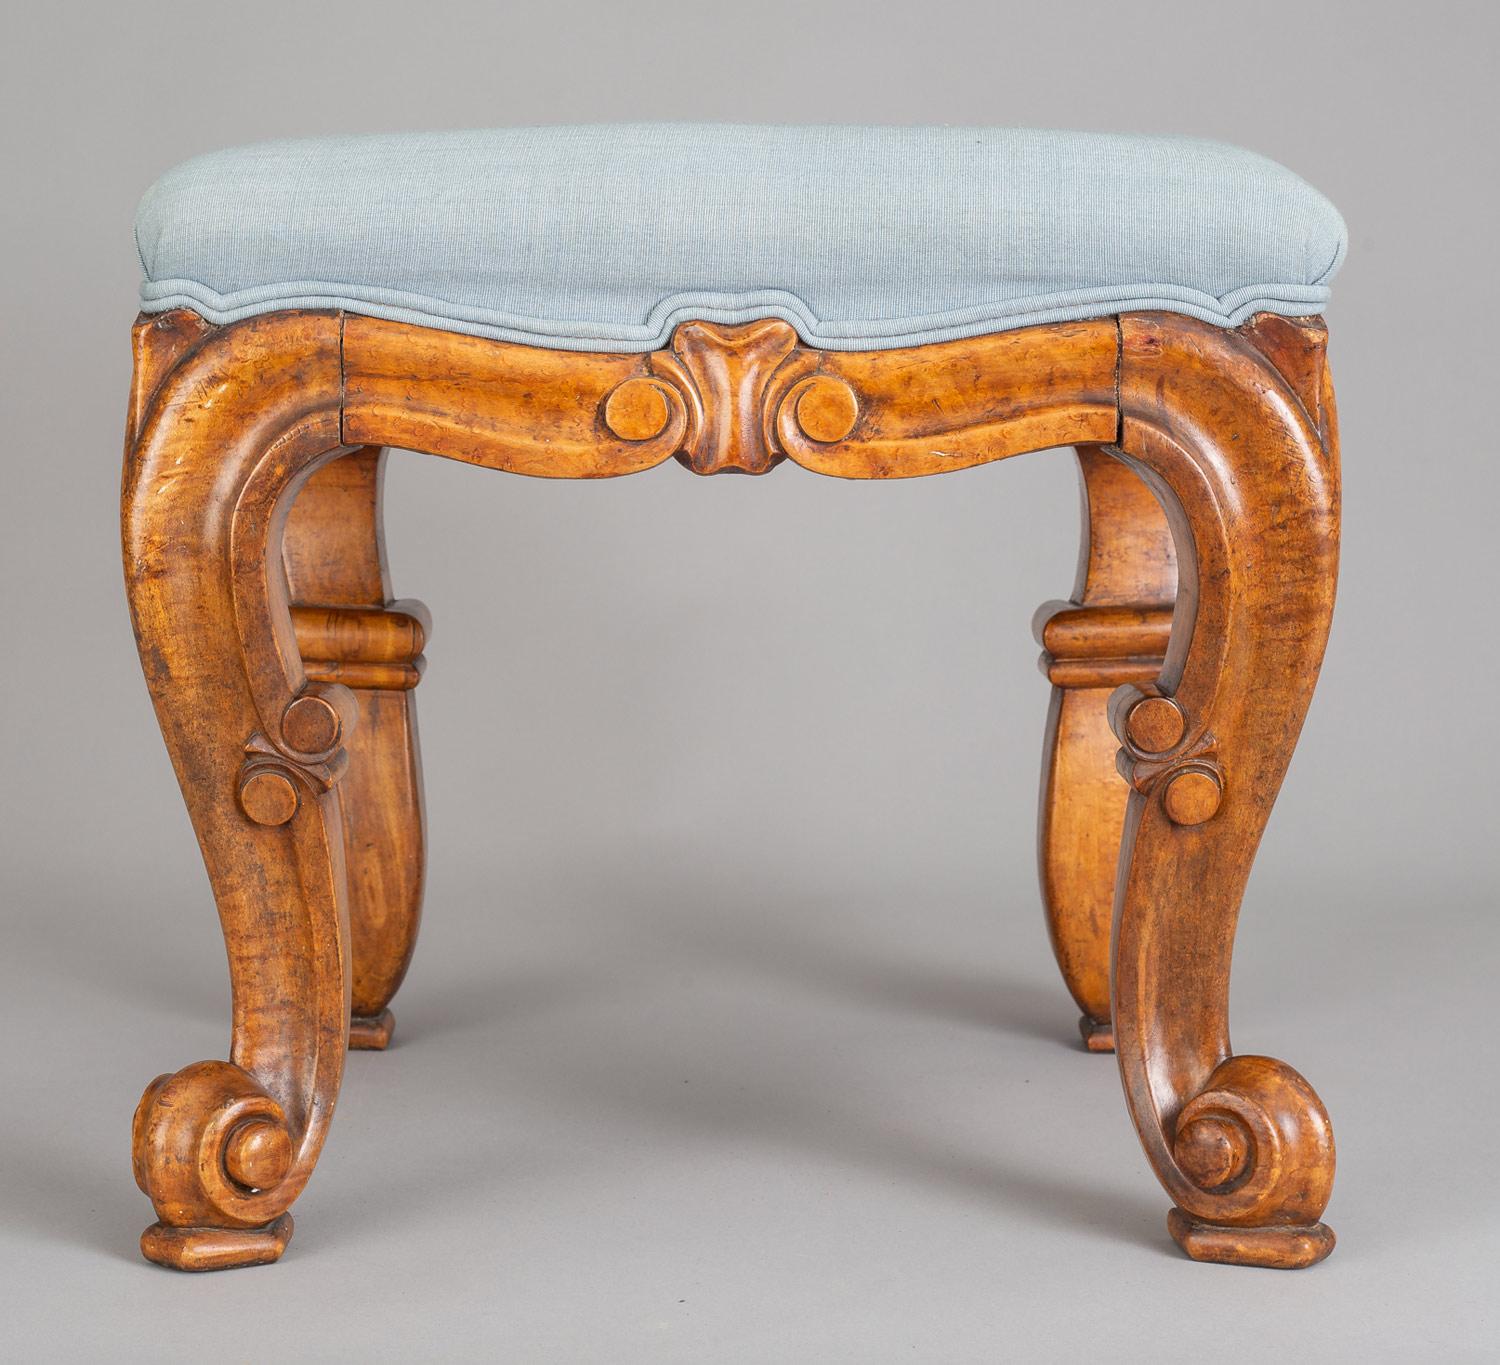 Early Victorian carved and molded bird’s eye maple stool with cabriole legs ending in scroll feet on pads. Upholstered in pale blue silk twill. Makers label on underside: G. Parkhurst & Co., Cabinet Makers, Haywards Heath.